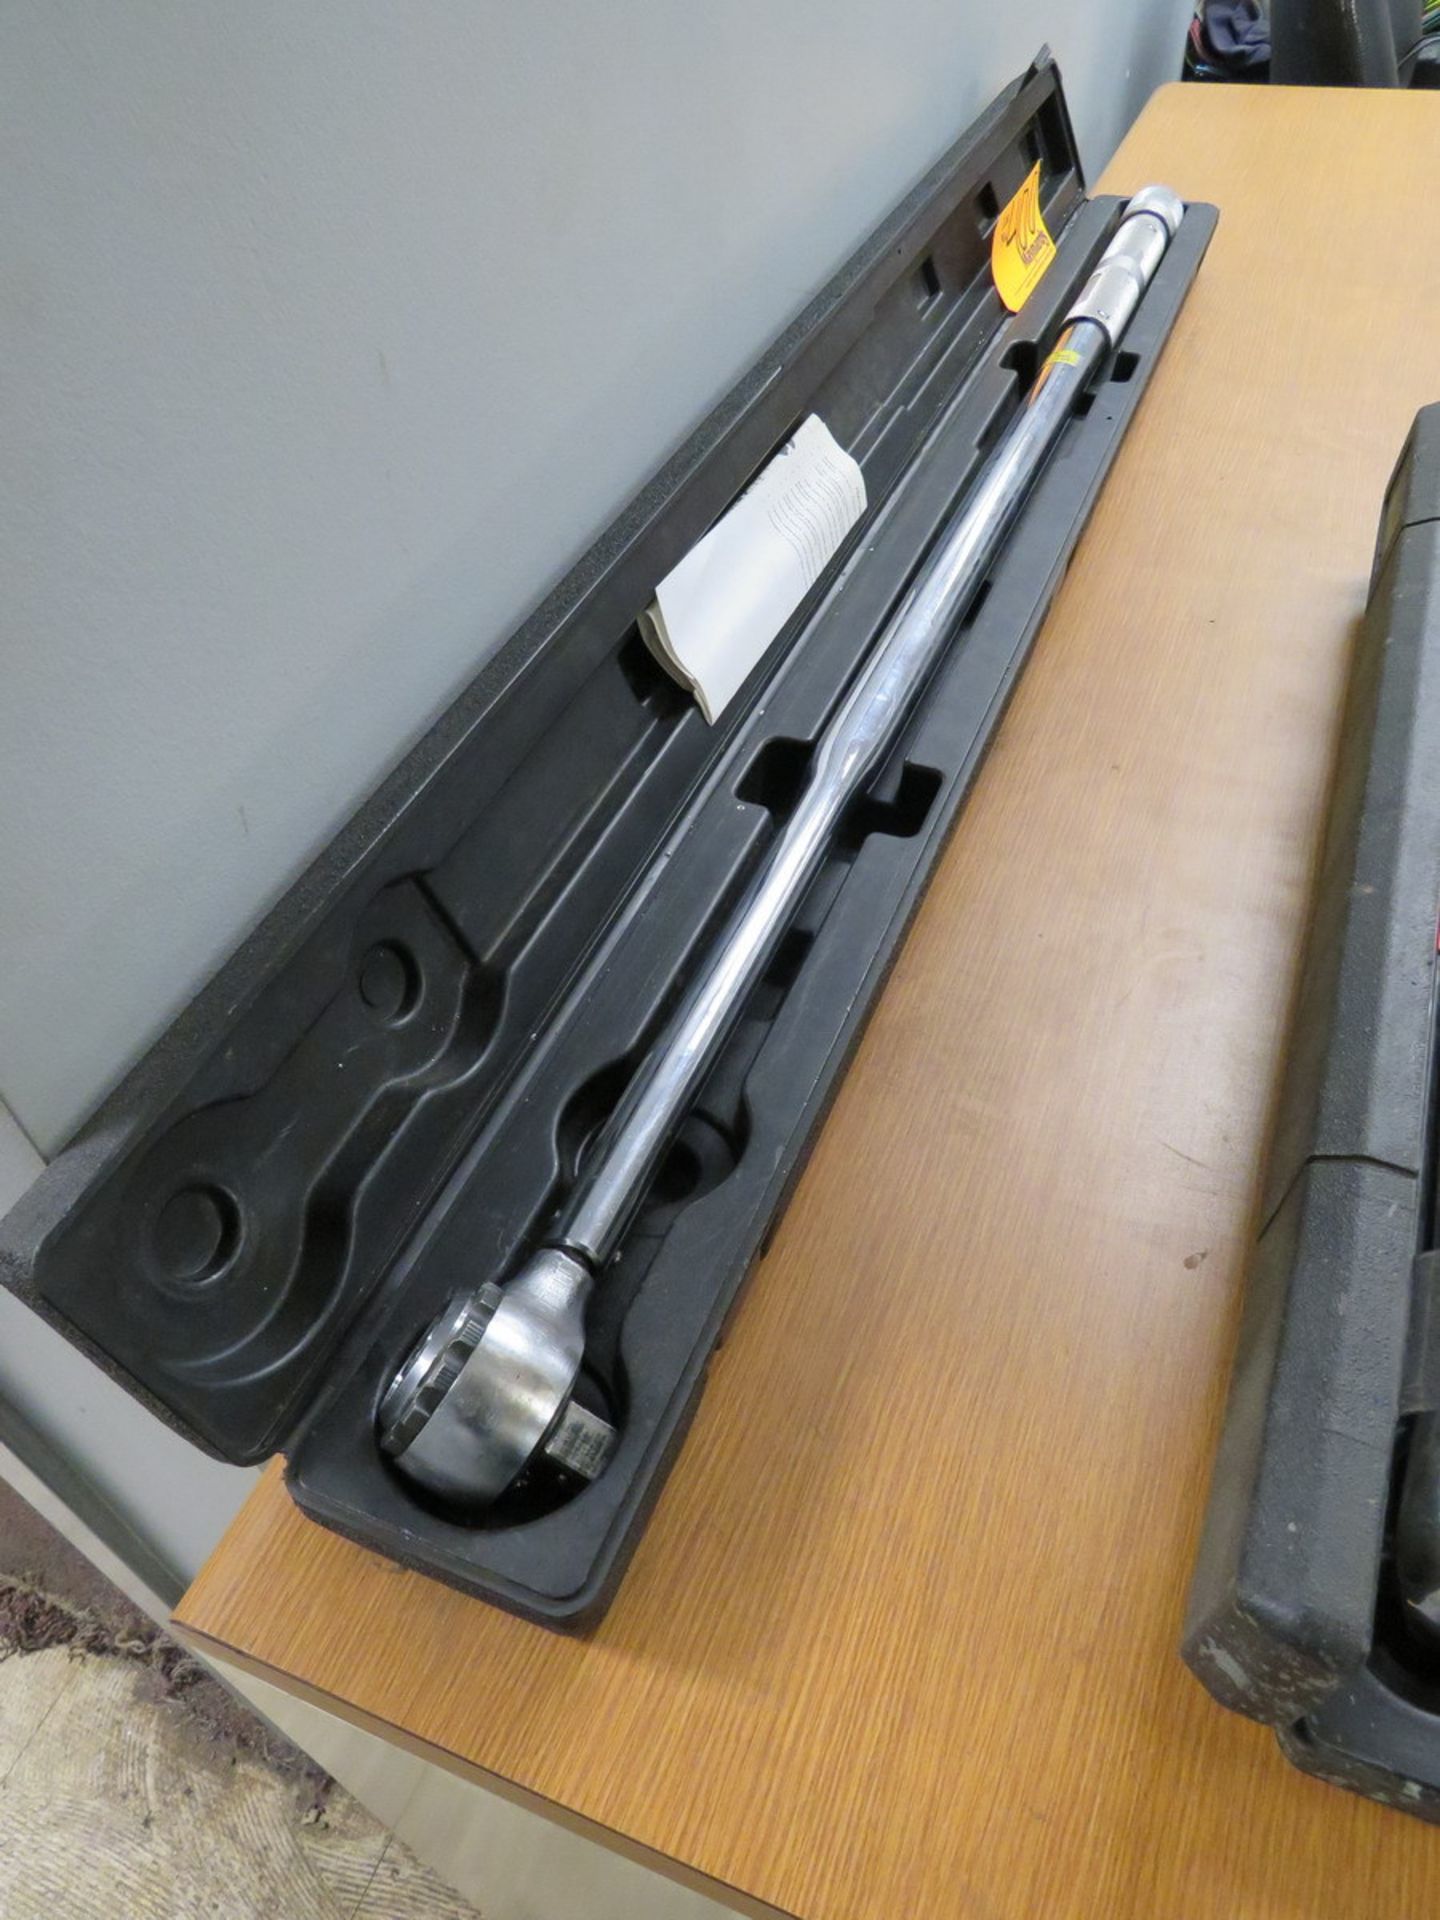 SK Torque Wrench - Image 2 of 2